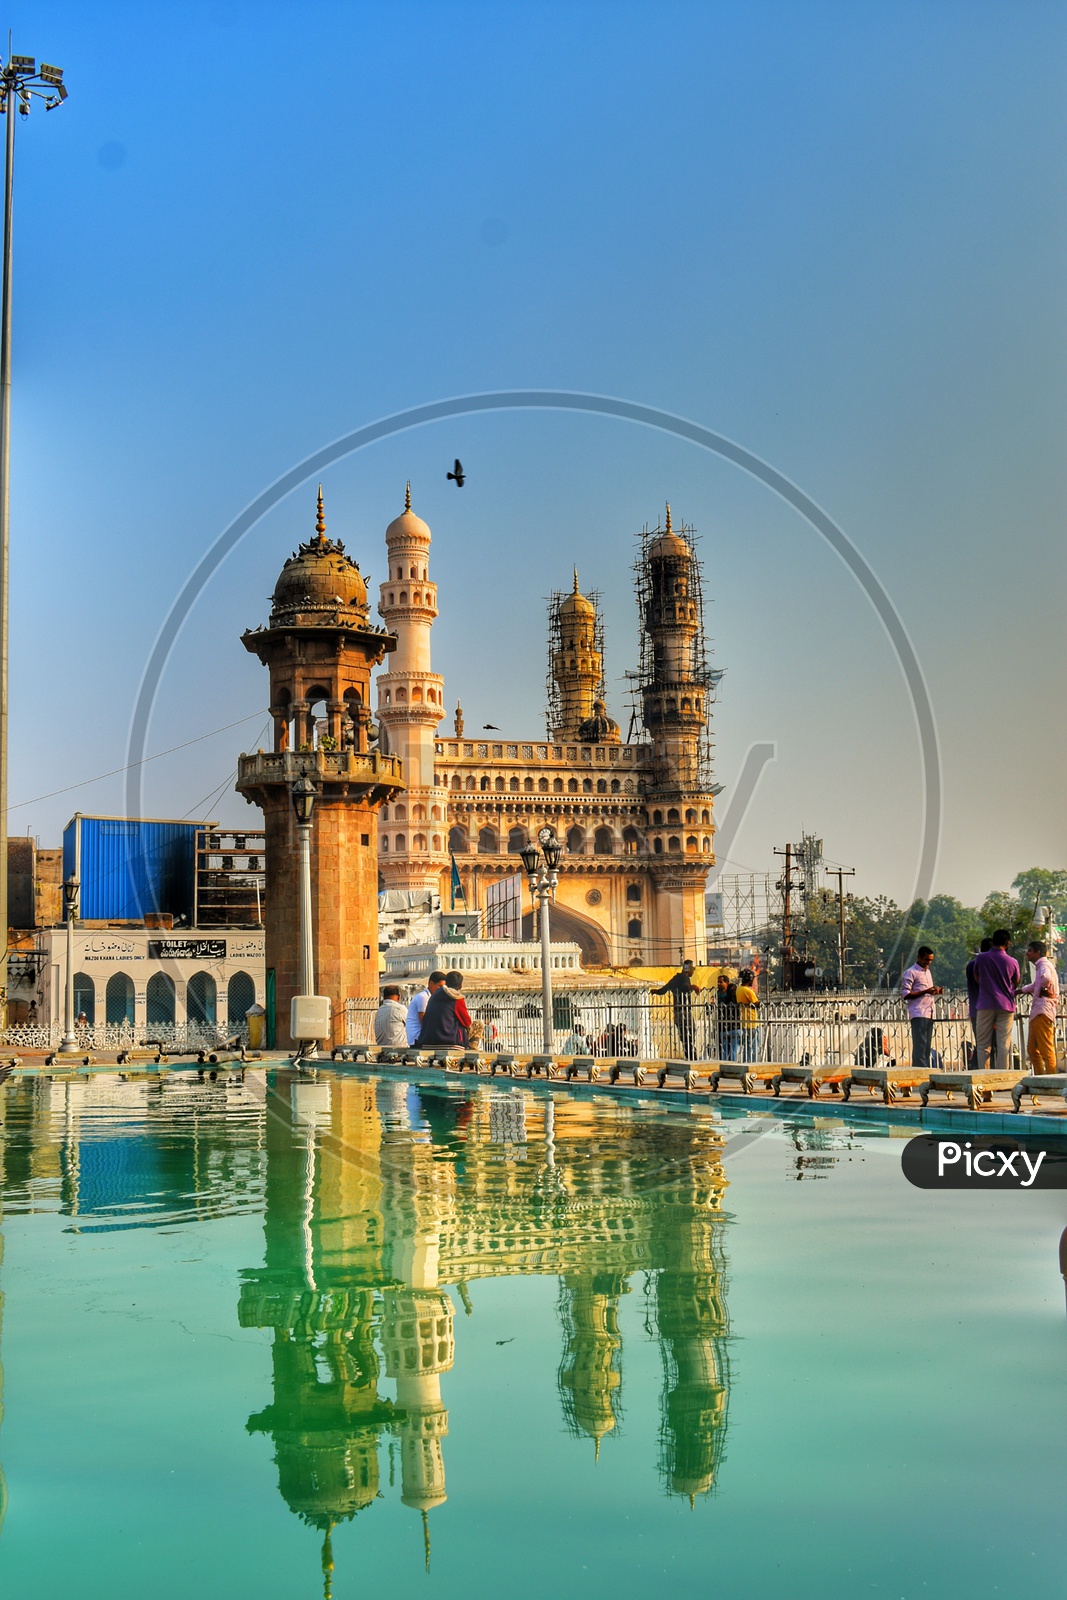 Reflection of Charminar from the holy Mecca Masjid